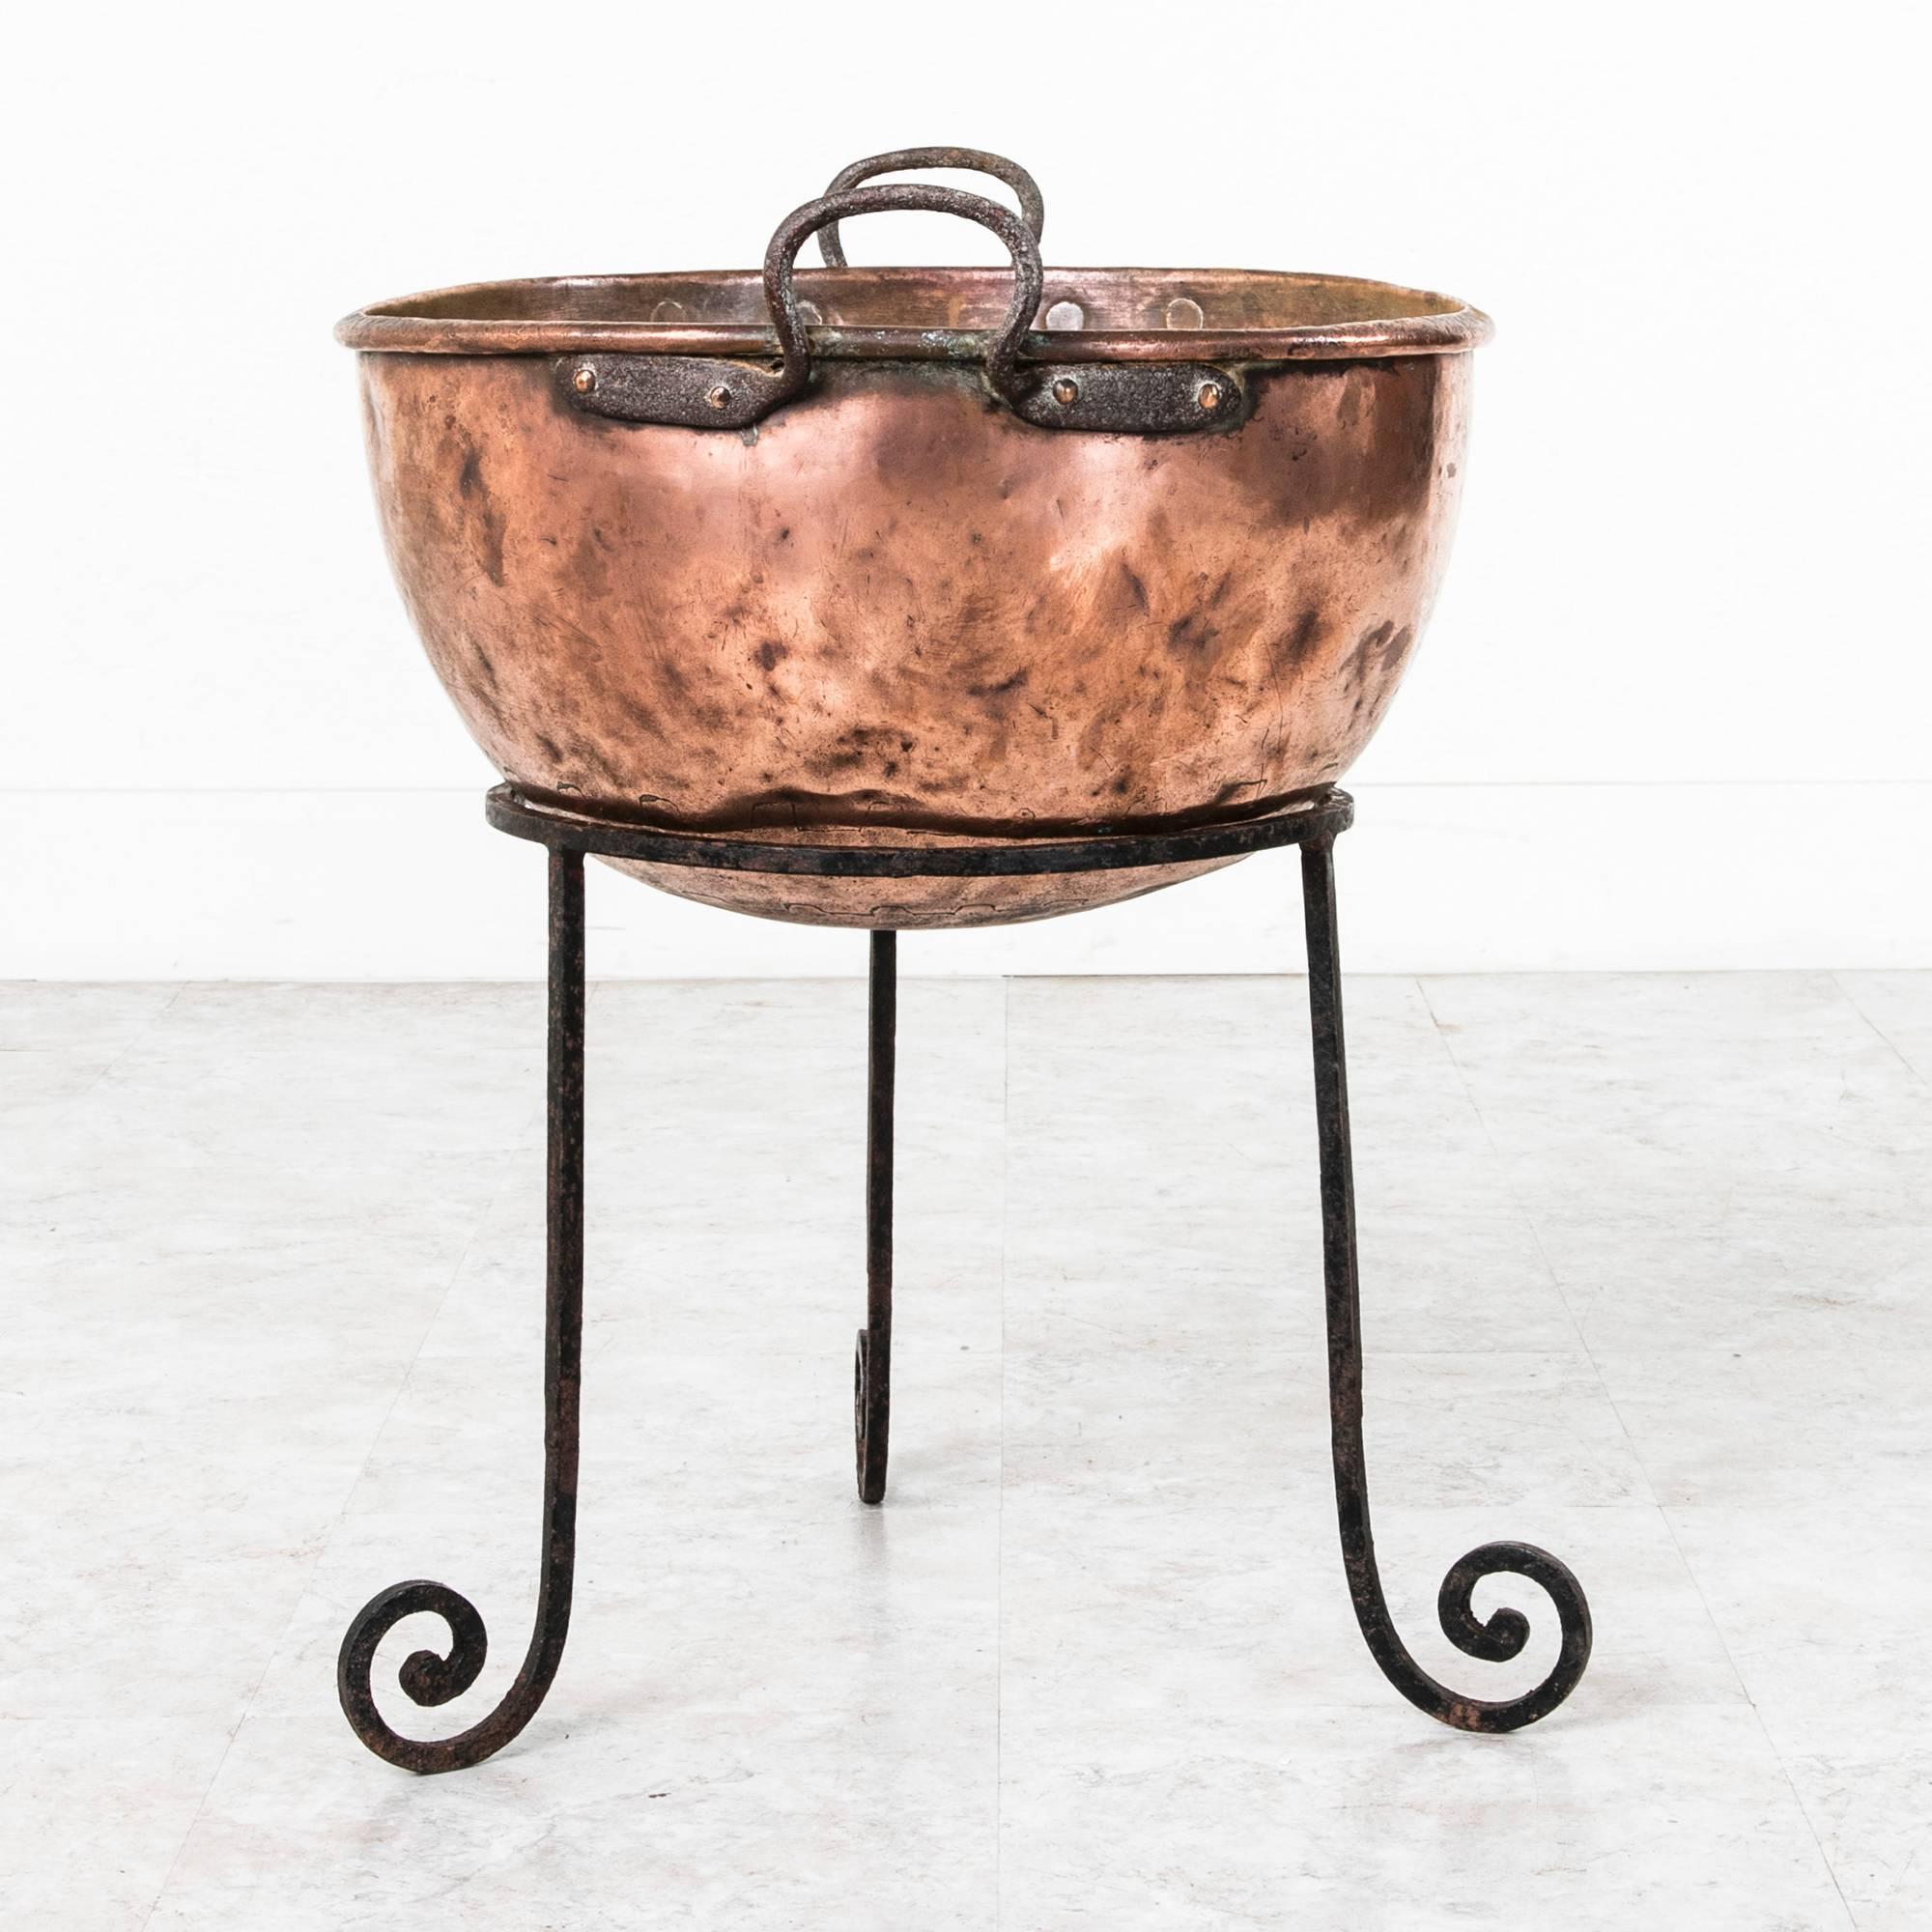 This nineteenth century copper brazier is of an ideal scale for chilling drinks or to serve as a dramatic planter for indoor or outdoor use.  This piece would also display wood beautifully by a hearth.  The large copper bowl is hand hammered with